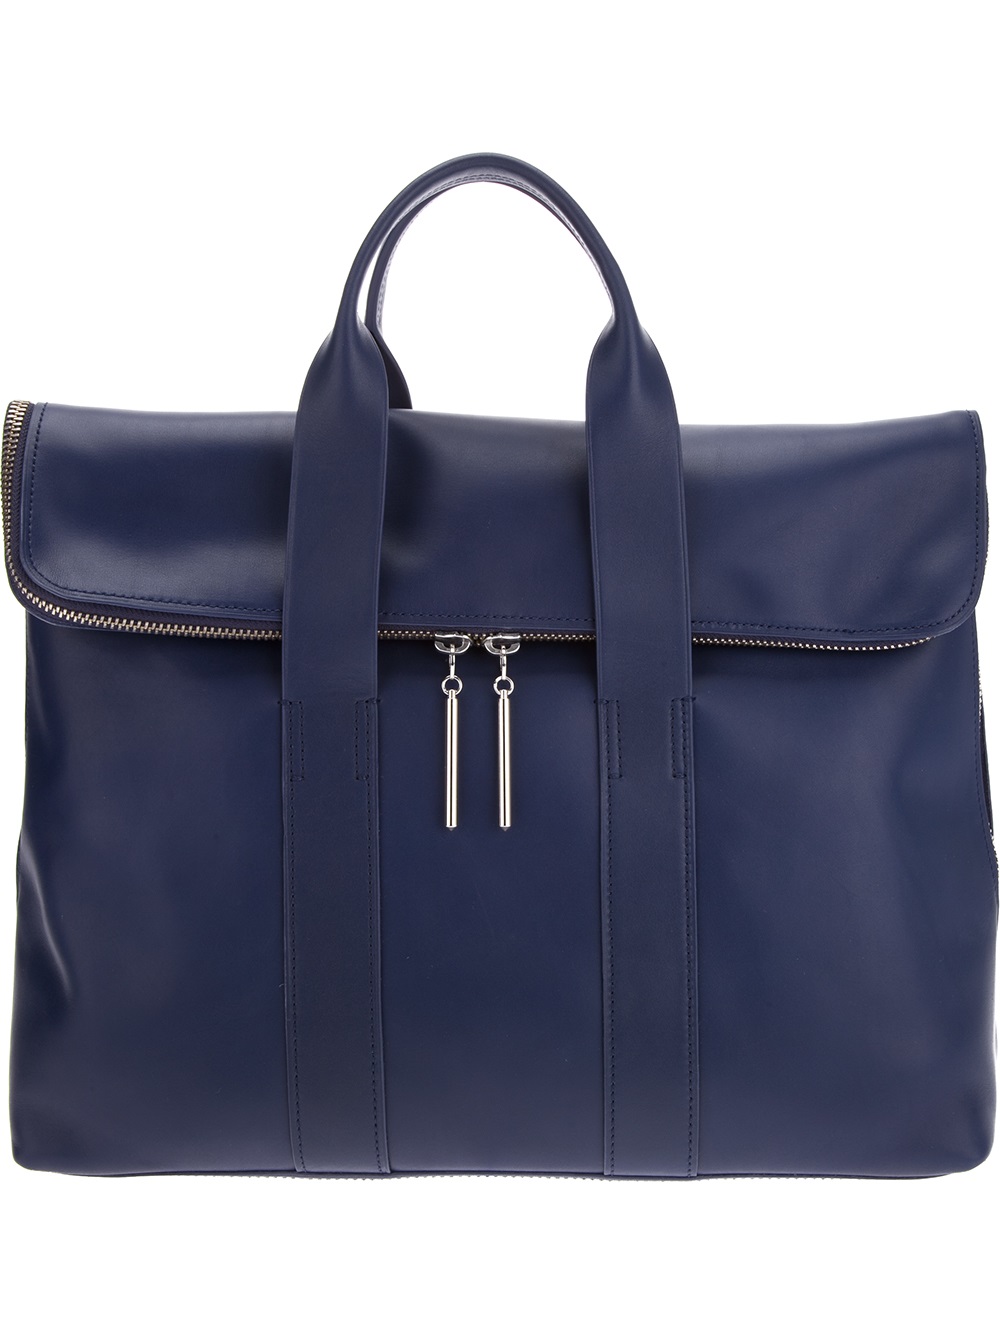 3.1 phillip lim '31 Hour' Tote in Blue (navy) | Lyst